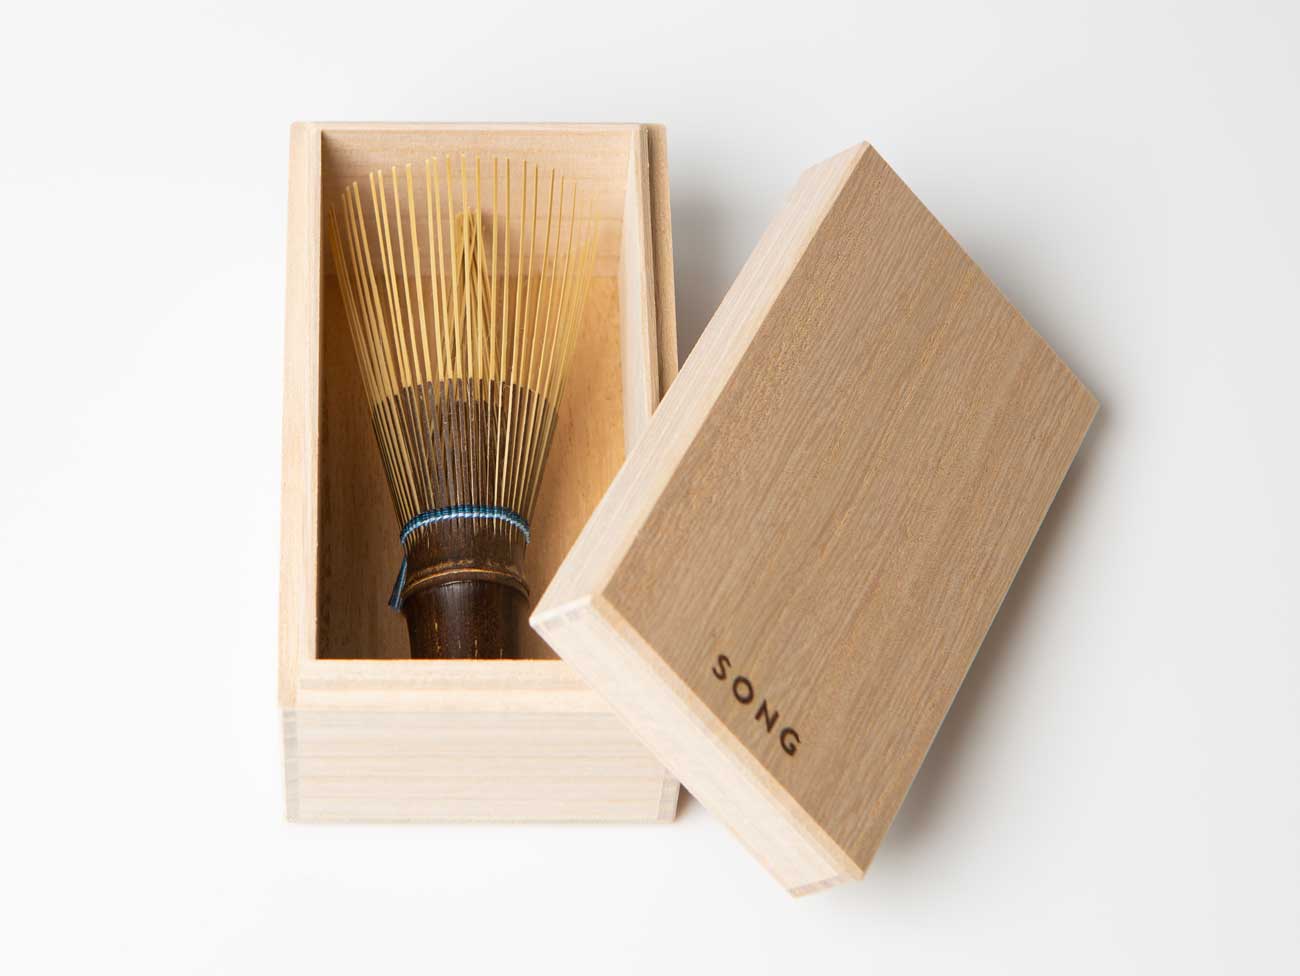 Blue stringed Matcha Whisk in giftbox.